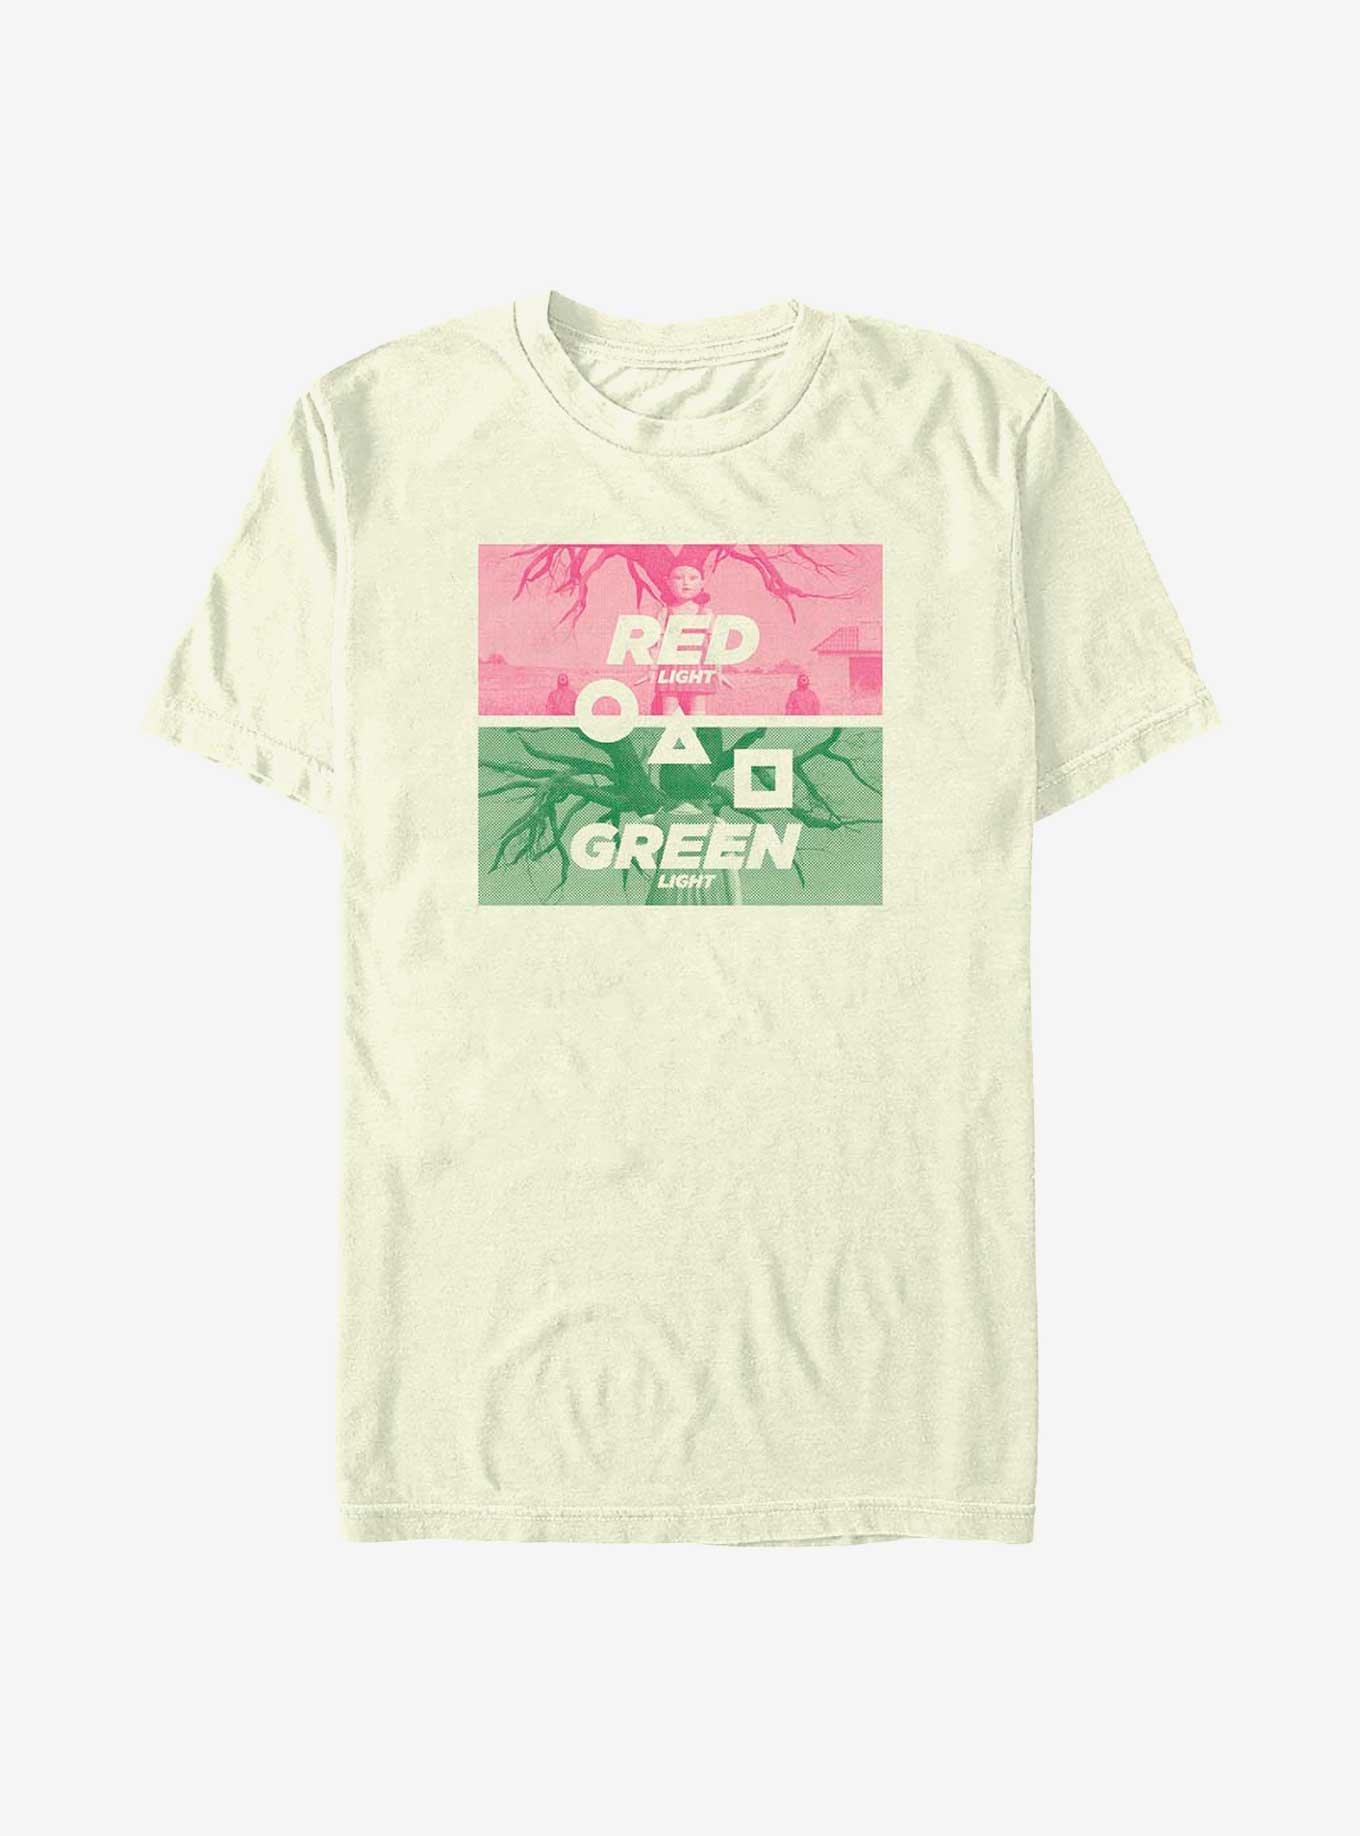 Squid Game First Game Red Light Green Light T-Shirt, NATURAL, hi-res